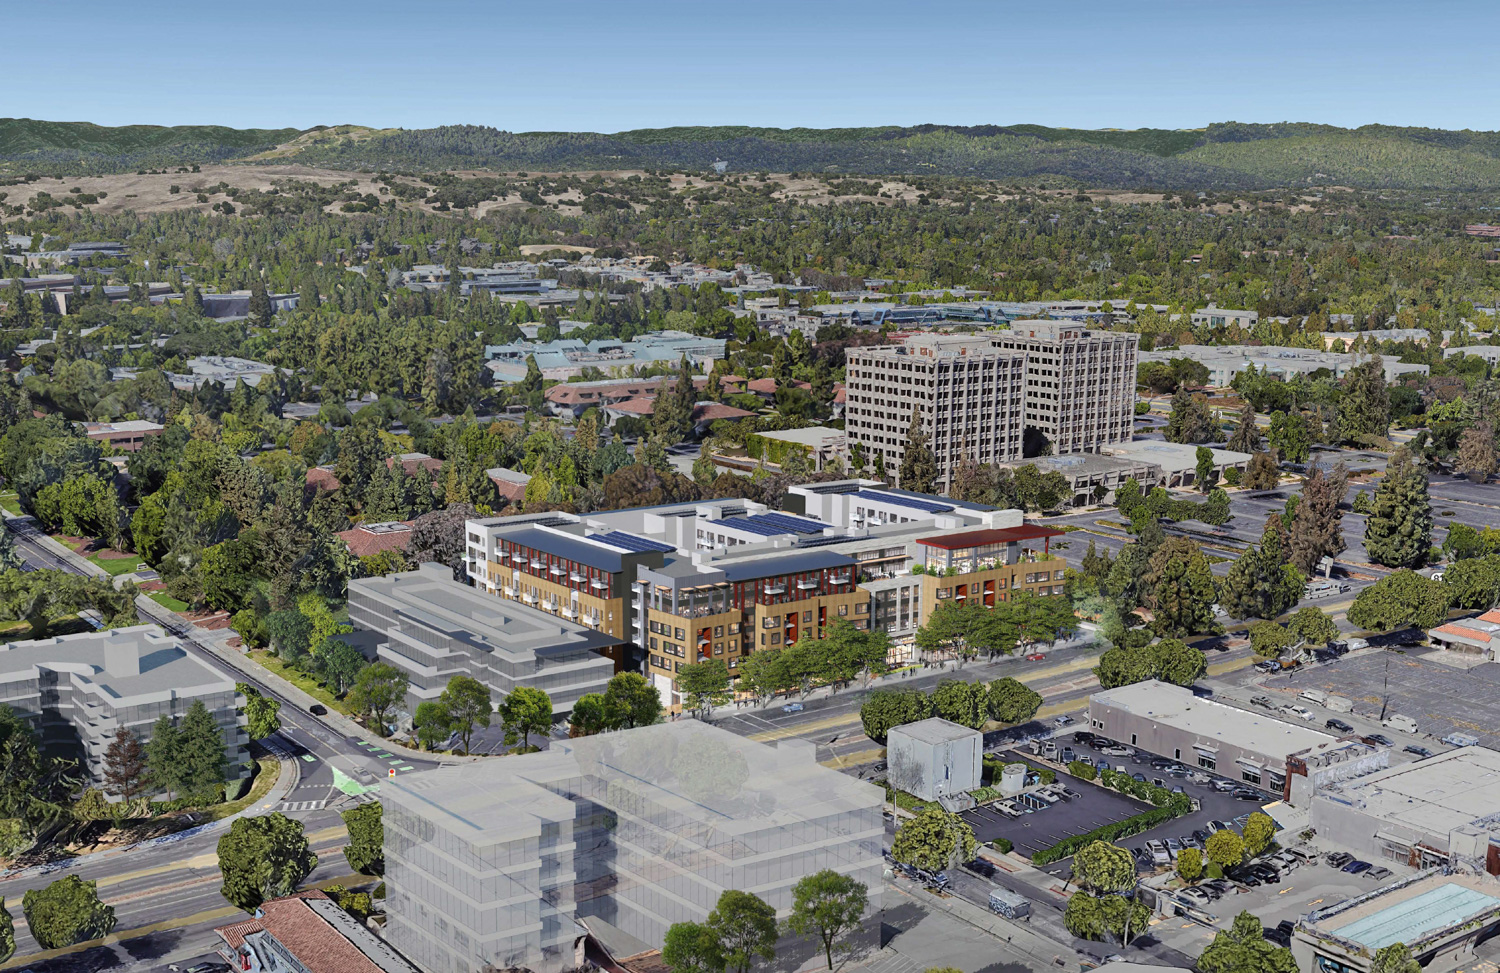 3150 El Camino Real aerial view, rendering by Studio T Square